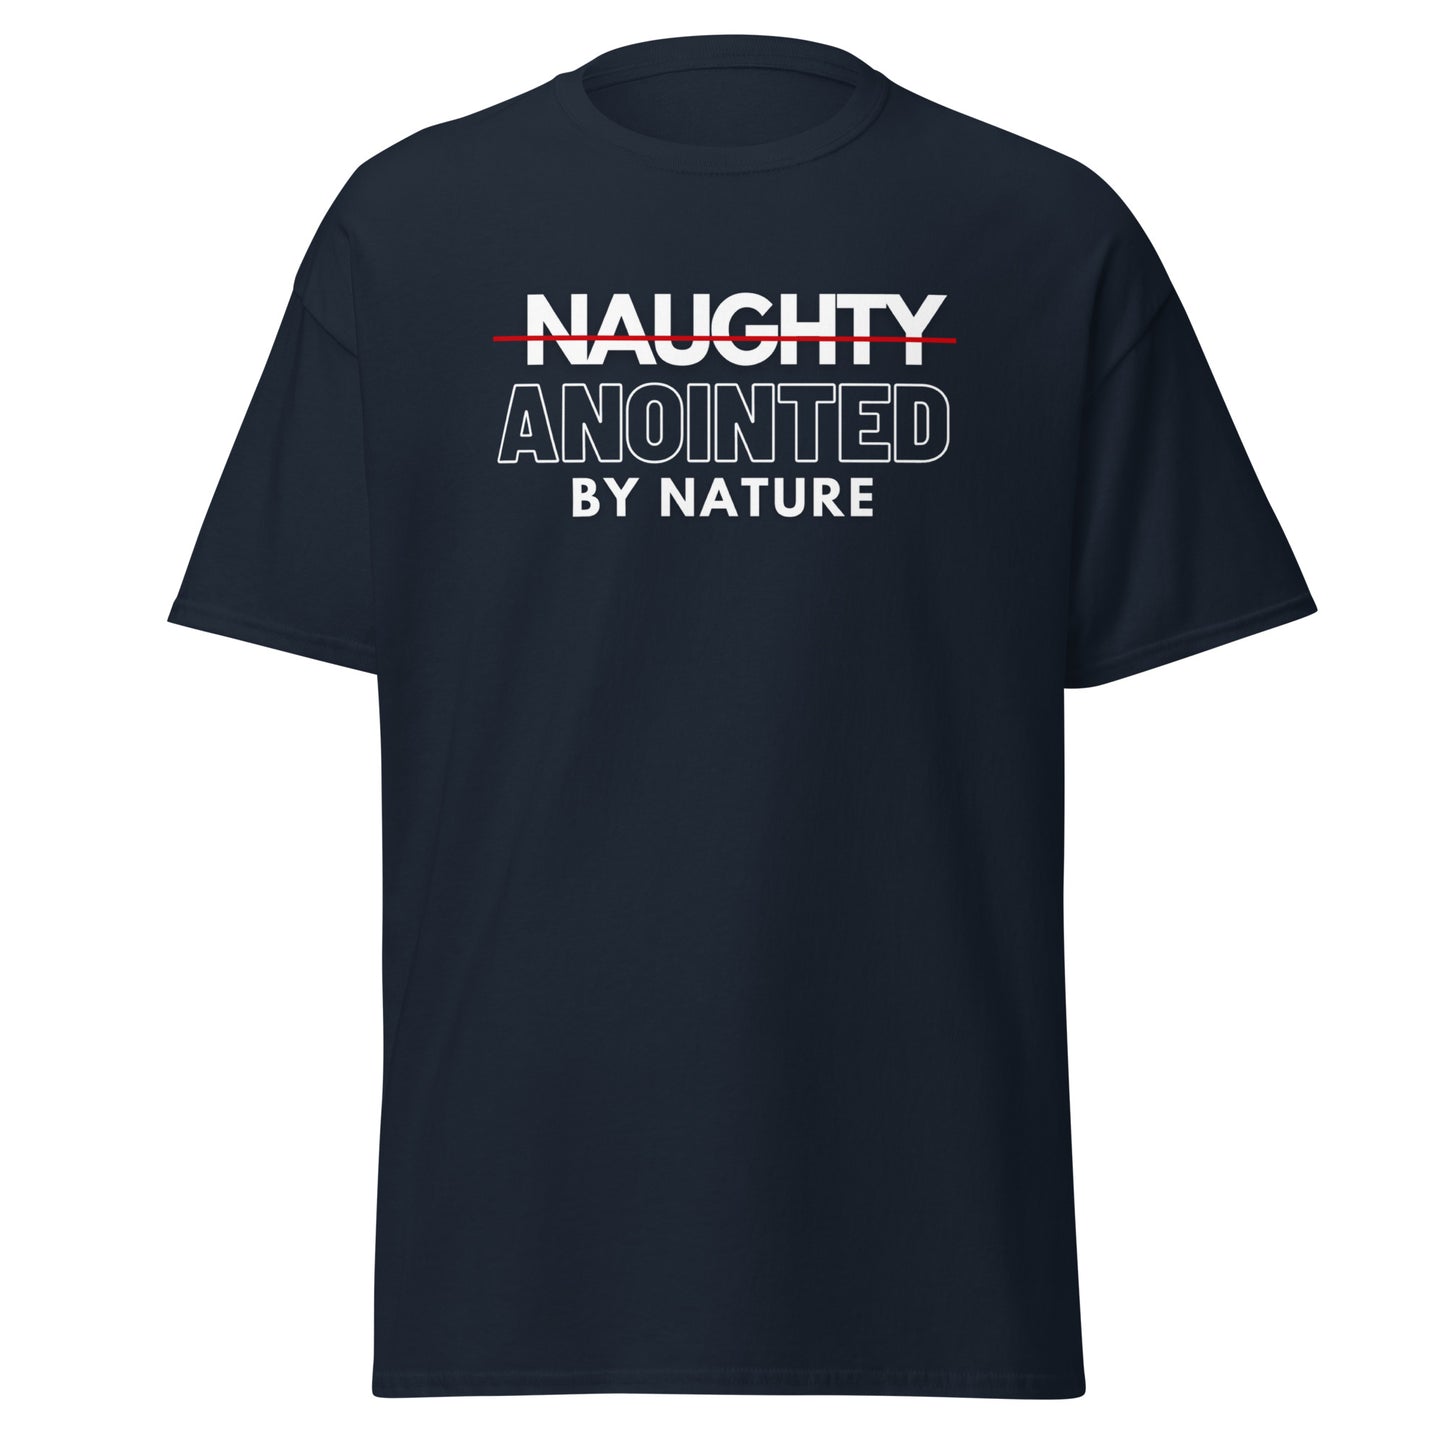 Anointed by Nature Unisex tee